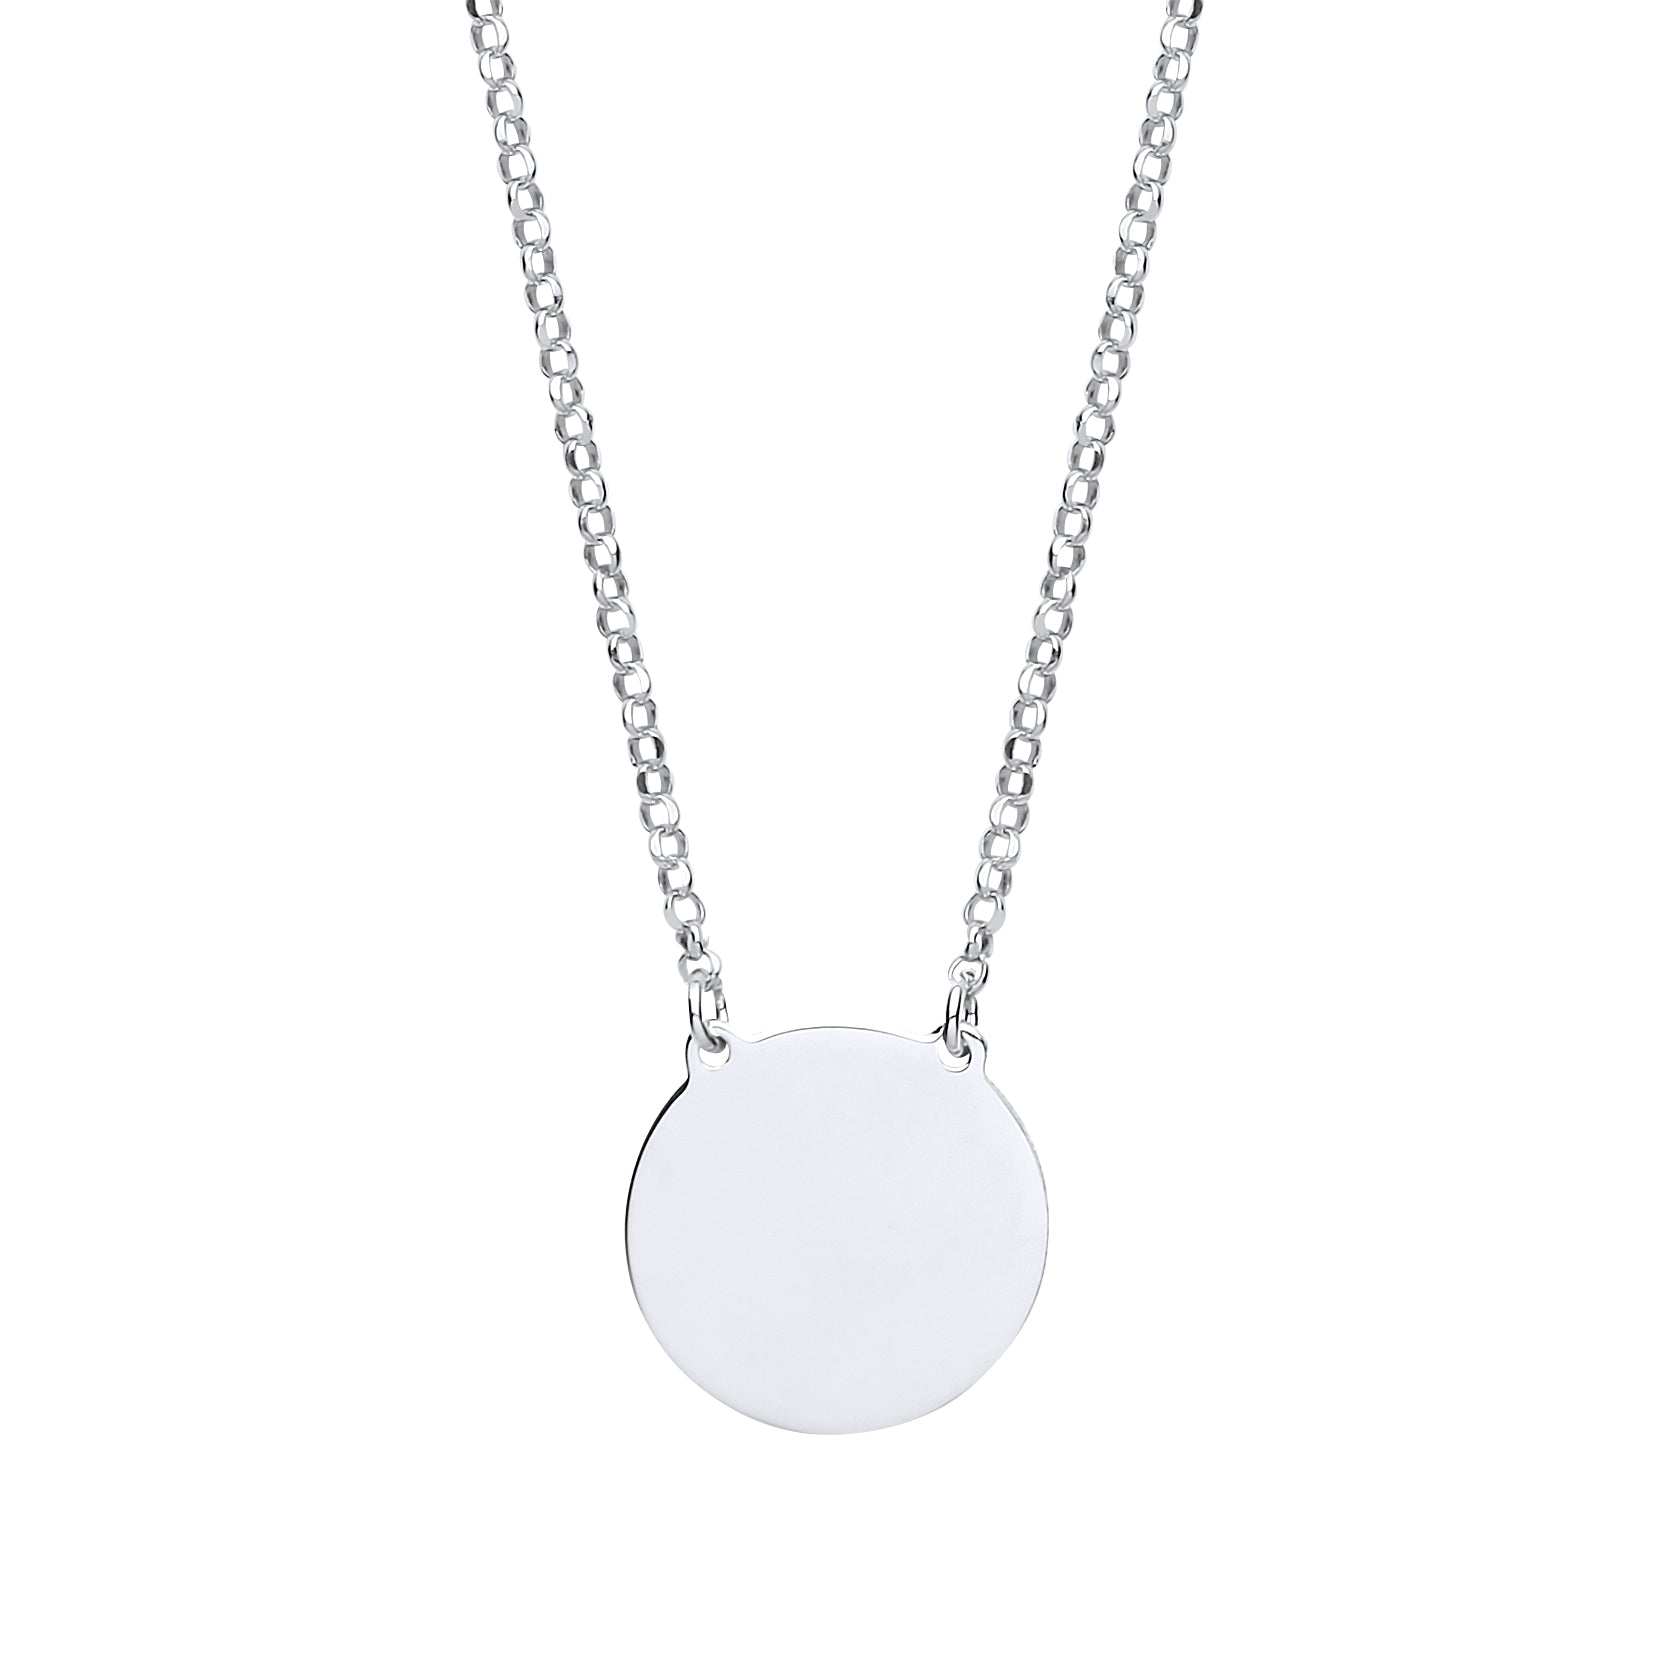 Silver  Round Disc Tag Medallion Necklace 16 + 1 inch - GVK191